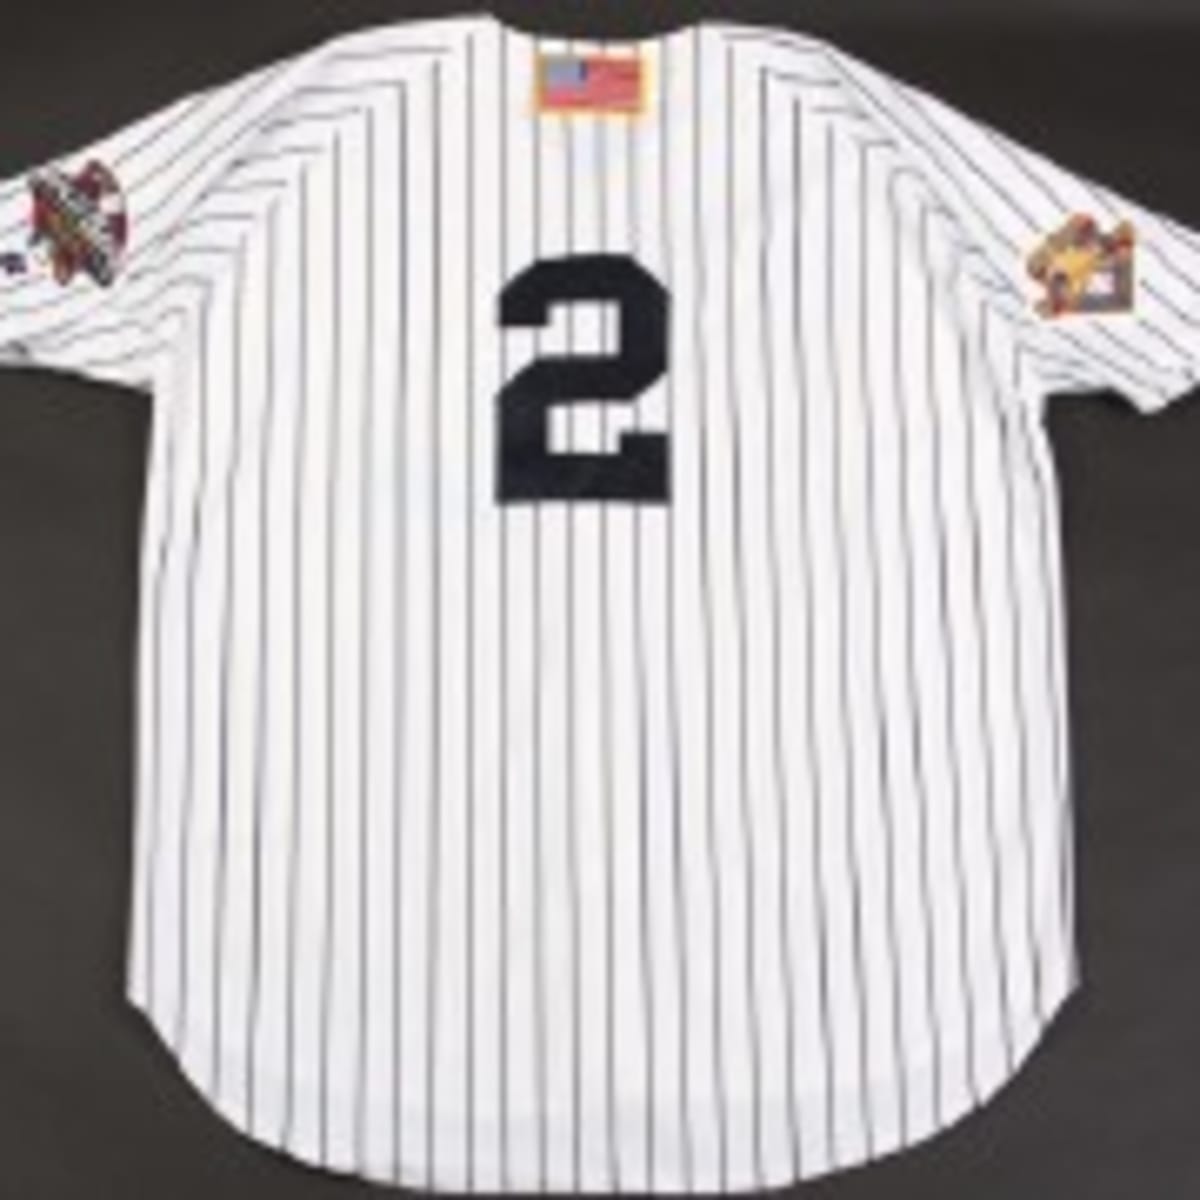 Jeter's Jersey Is No. 1 in 2010 MLB Sales - WSJ